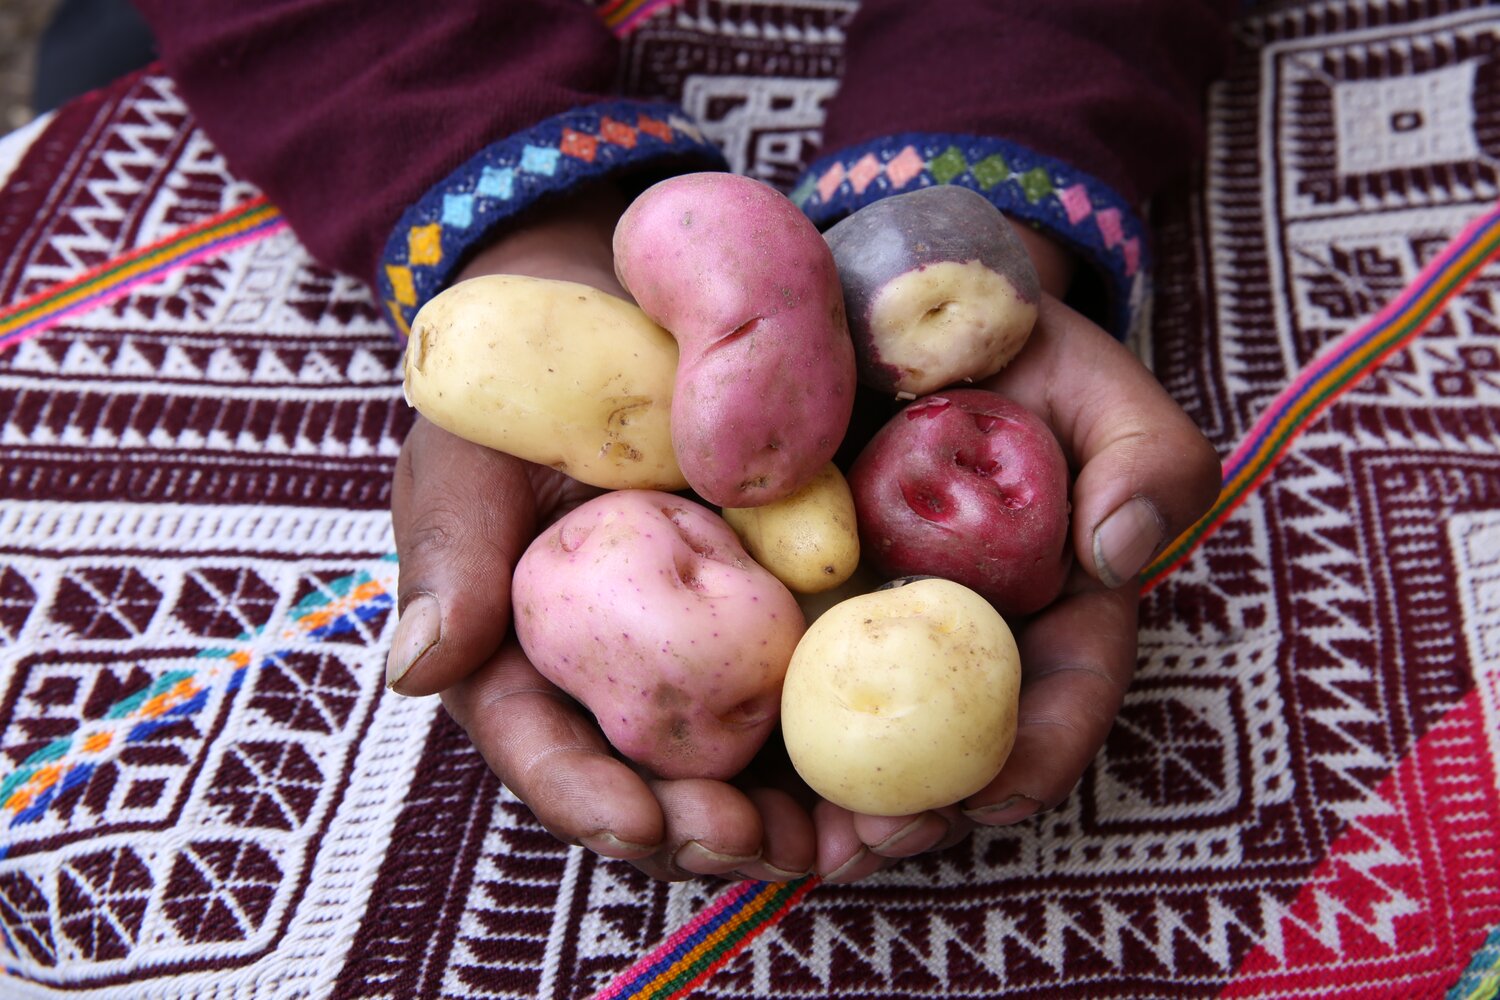 It’s estimated that potatoes were domesticated about 7,000 years ago. They originated in the Andes, where around 180 wild potato species can still be found. At the Parque de la Papa (Potato Park), near Cusco, farmers grow, consume and conserve hundreds of varieties. Credit: L.M. Salazar/Crop Trust